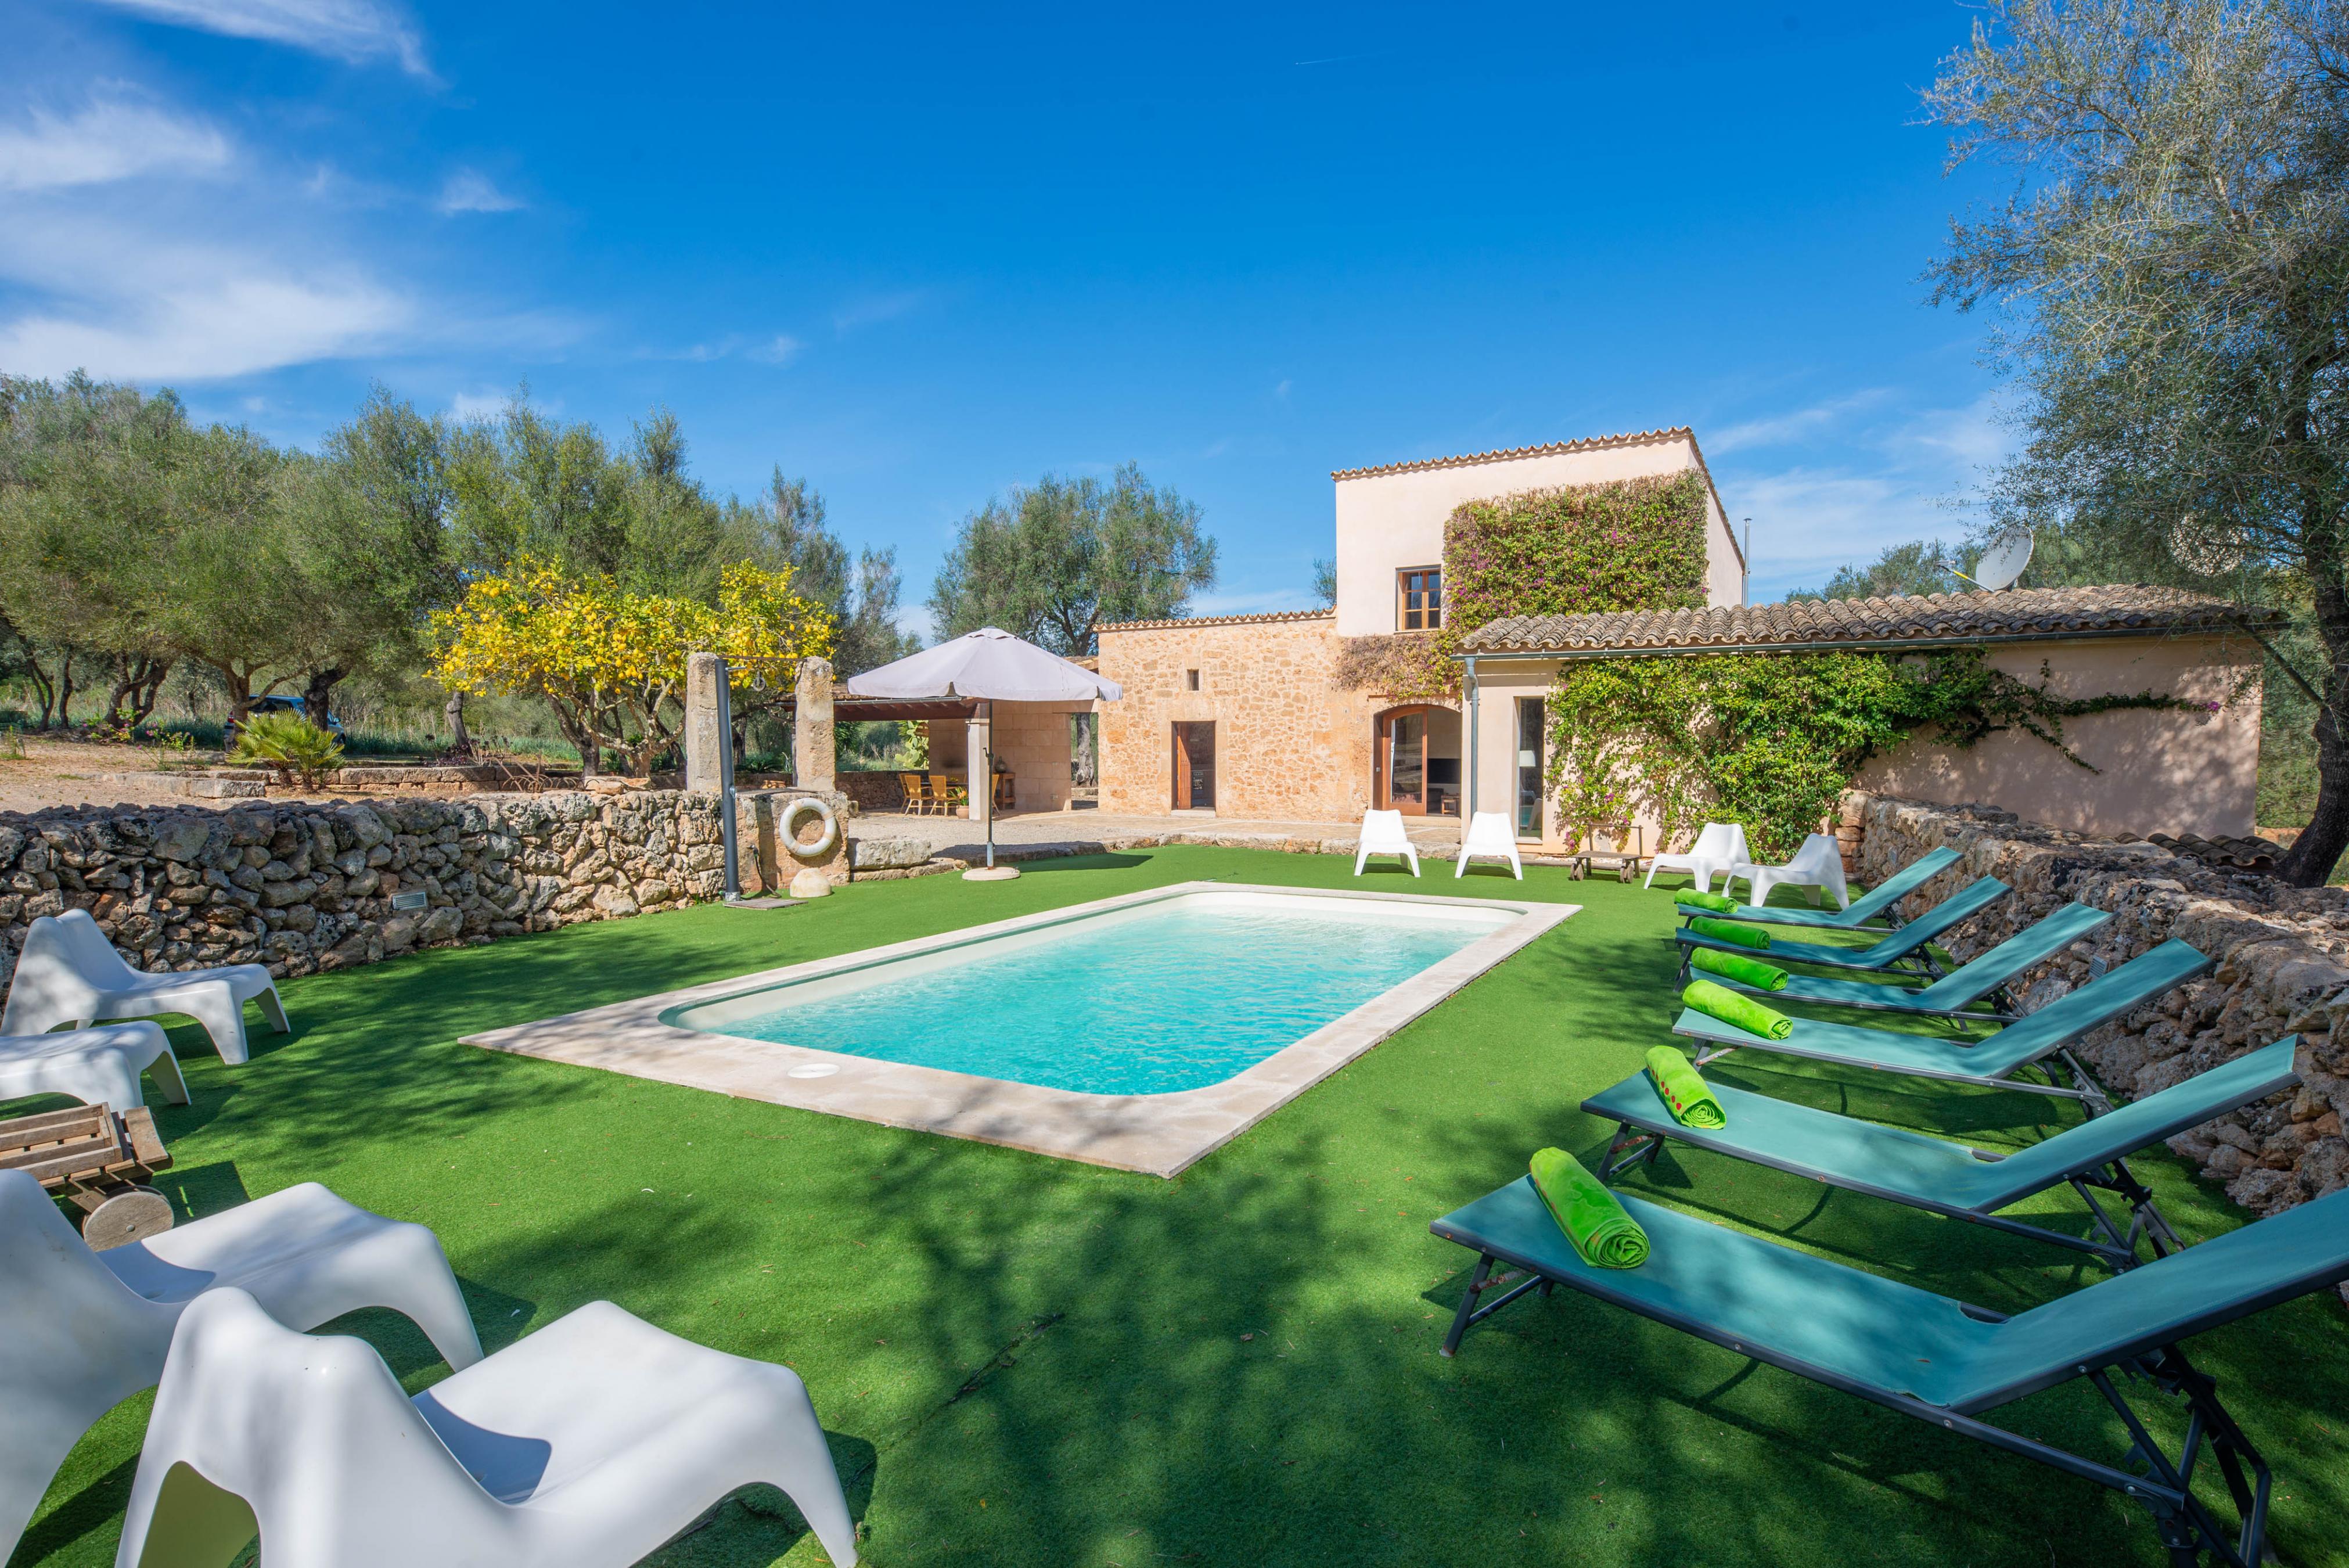 Property Image 1 - CAN PERE RAPINYA - Authentic Majorcan villa with private pool, located amidst nature and greenery Free WiF